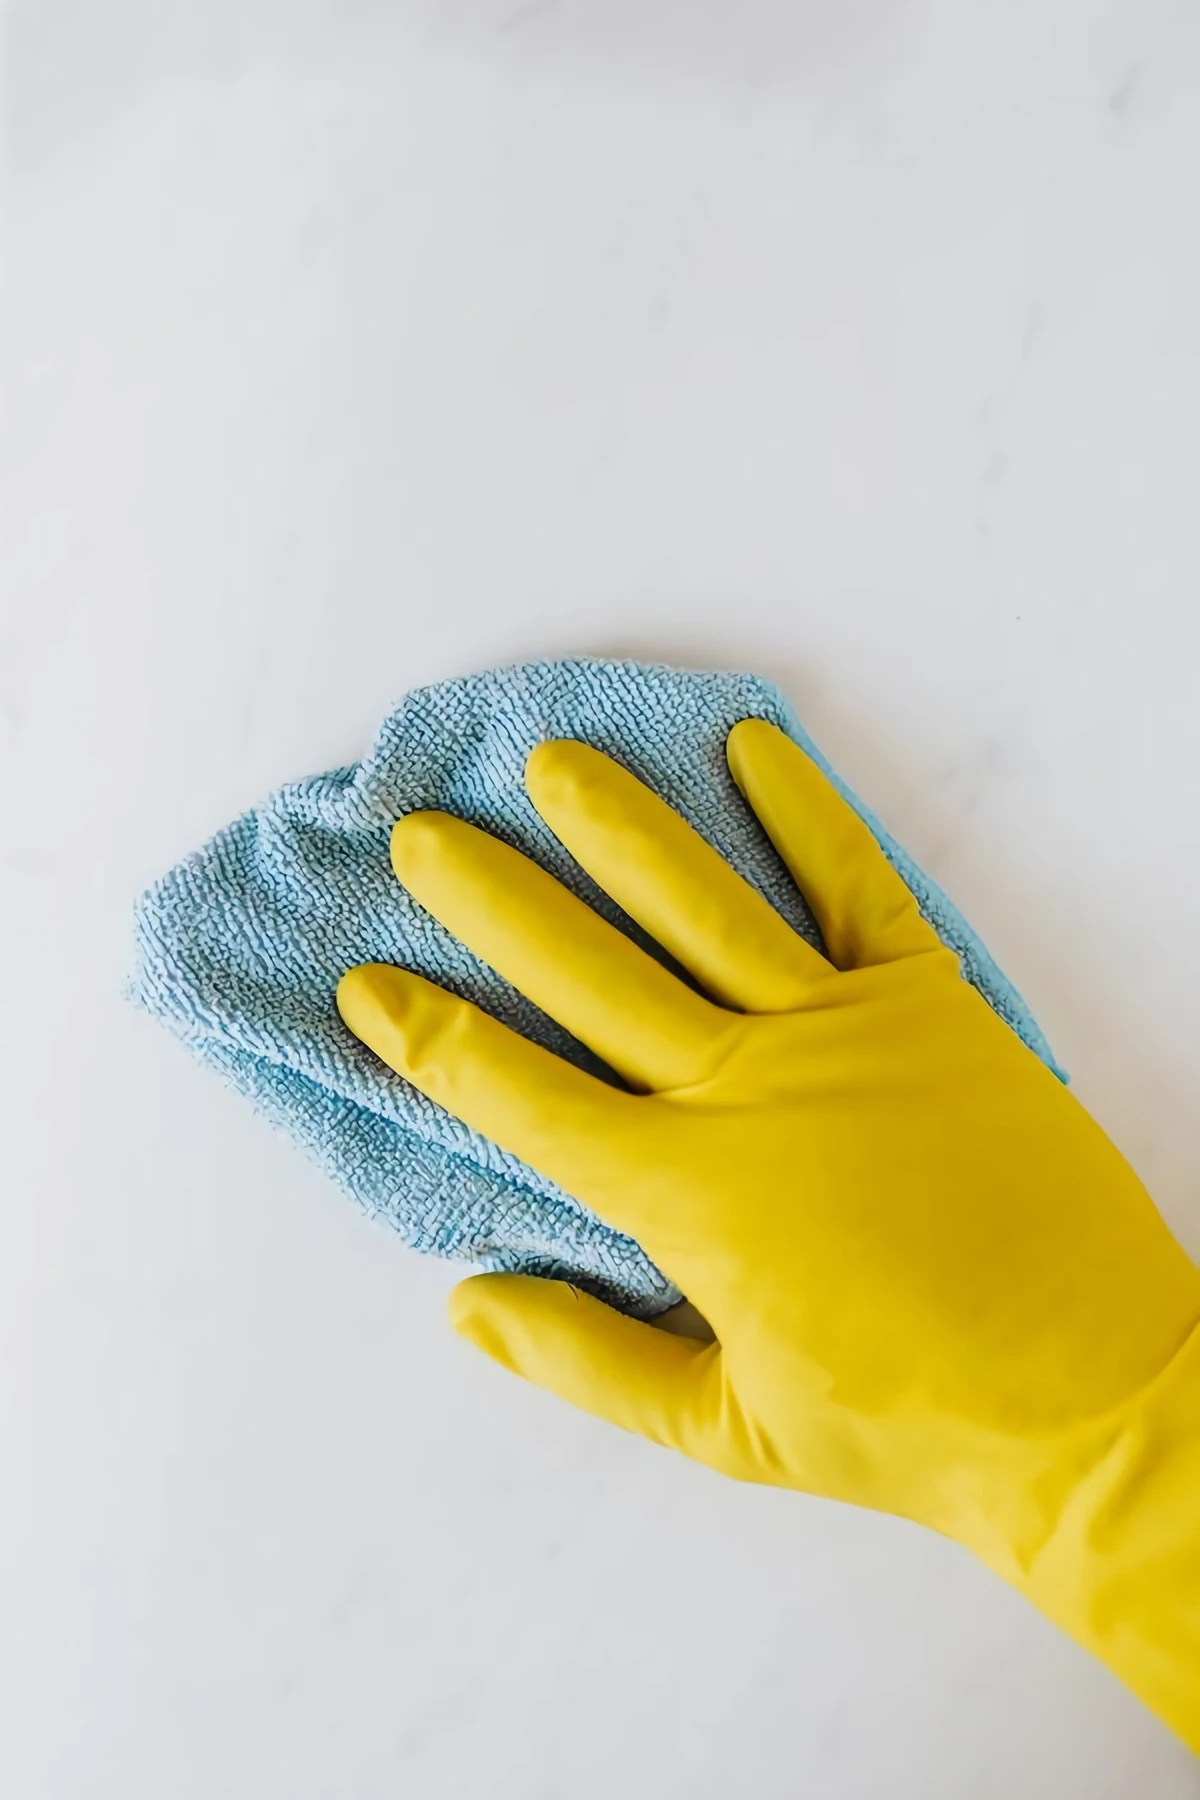 how to clean glass shower doors yellow cleaning glove and microfiber cloth